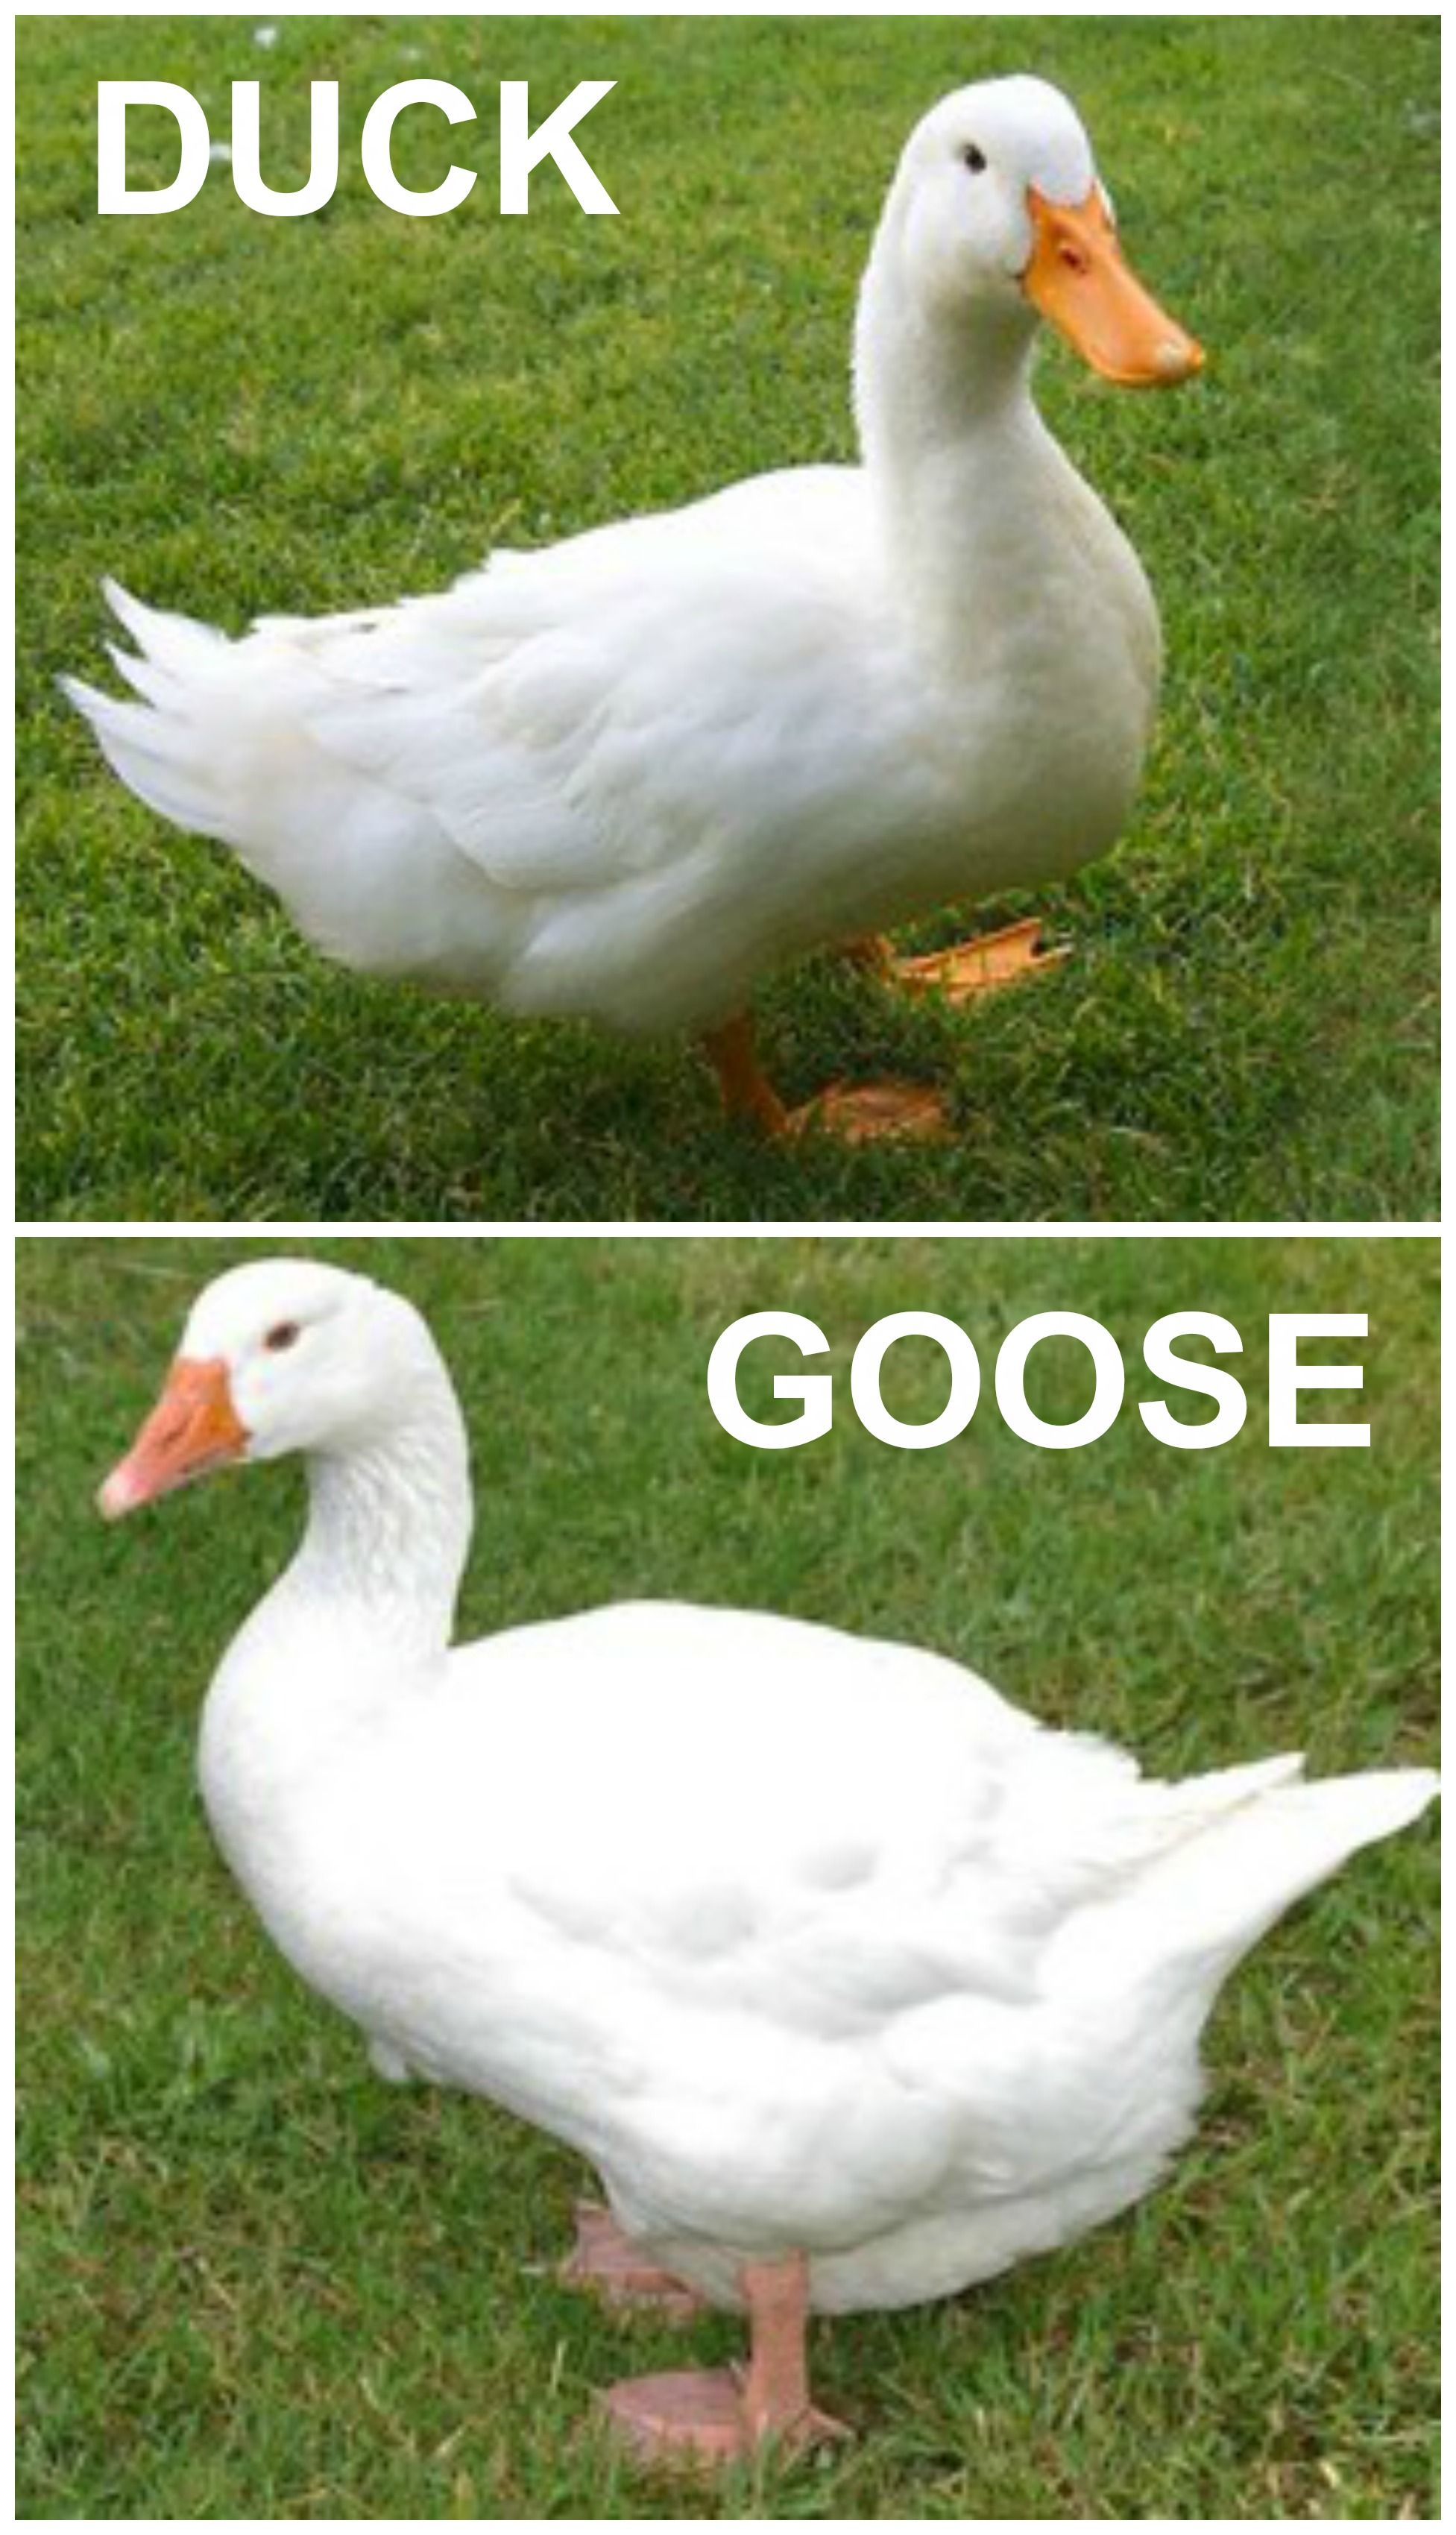 Is it a duck or a goose? -U can tell since the duck is as evil as an ...